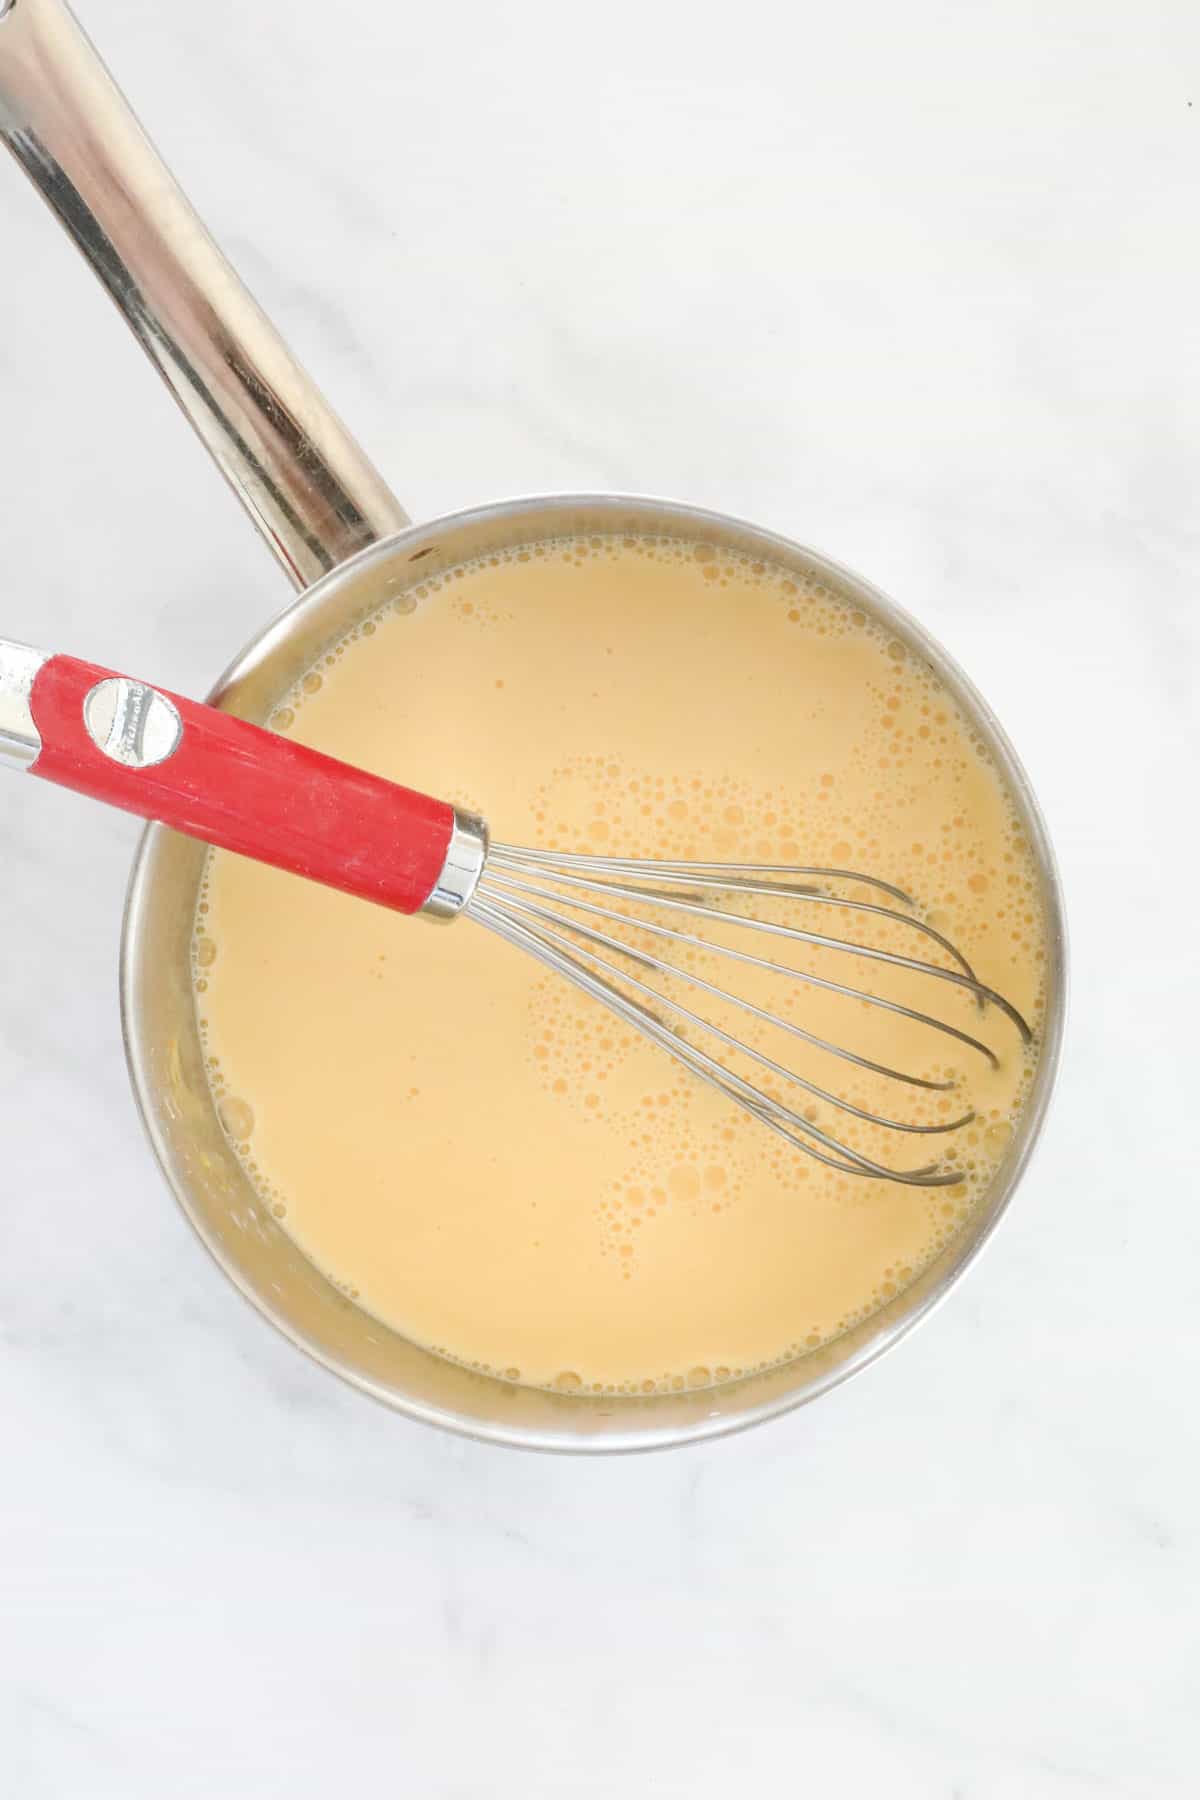 A red handled whisk in a pot of custard powder, sugar and milk.